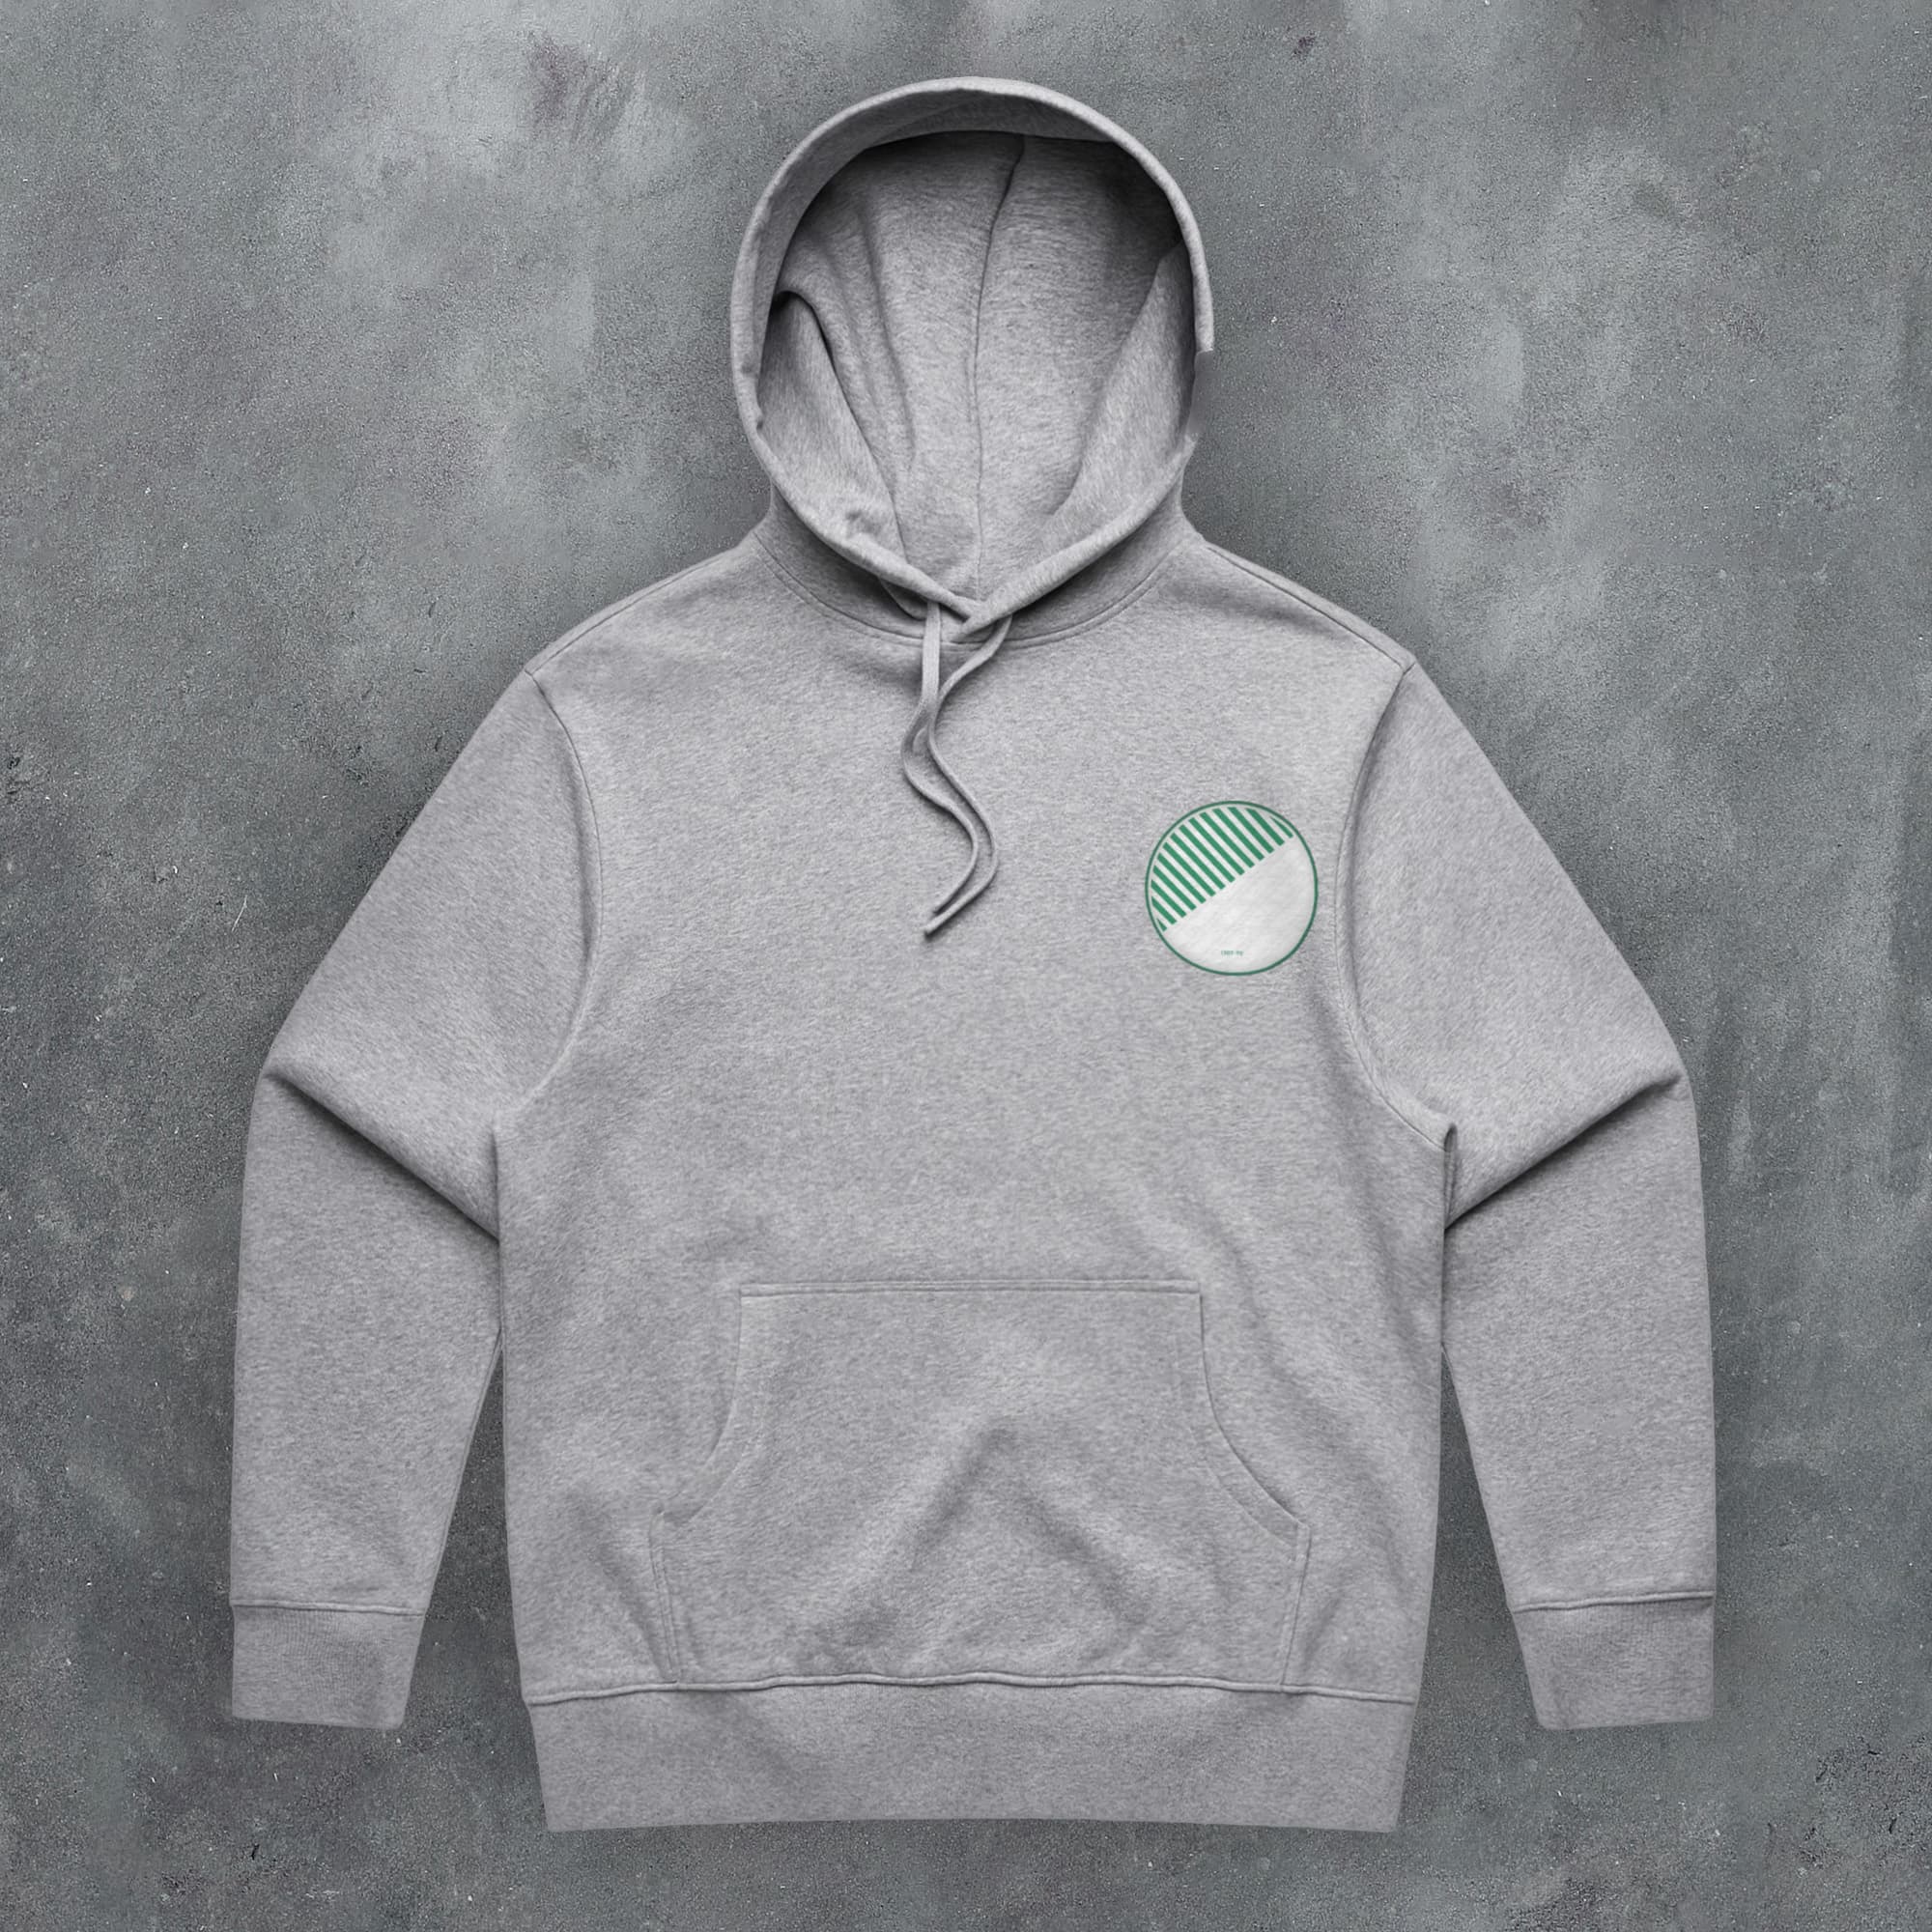 a grey sweatshirt with a green and white logo on it